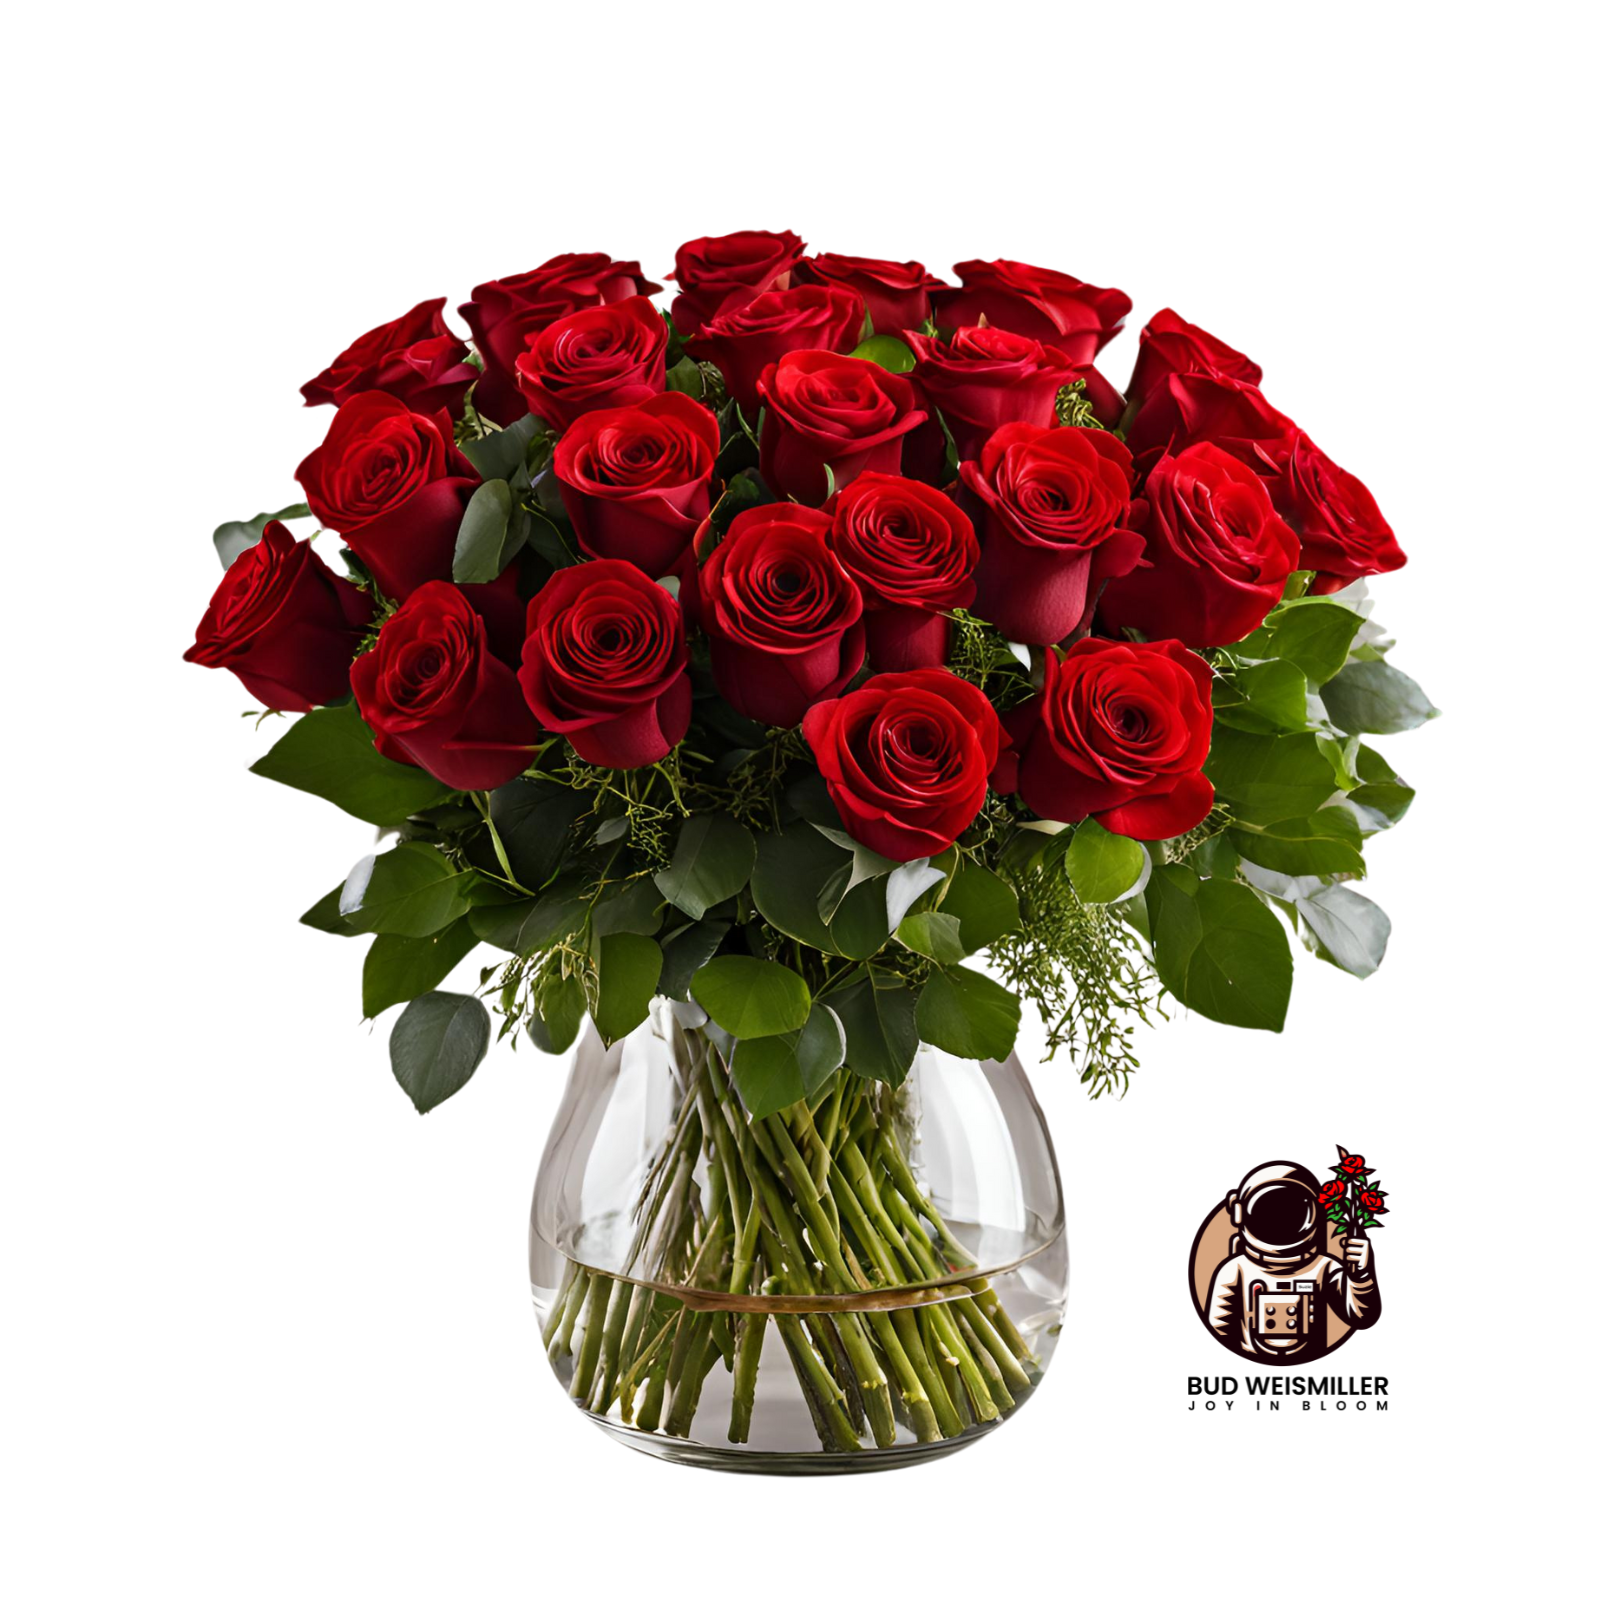 24 red roses artfully arranged in a clear glass vase.